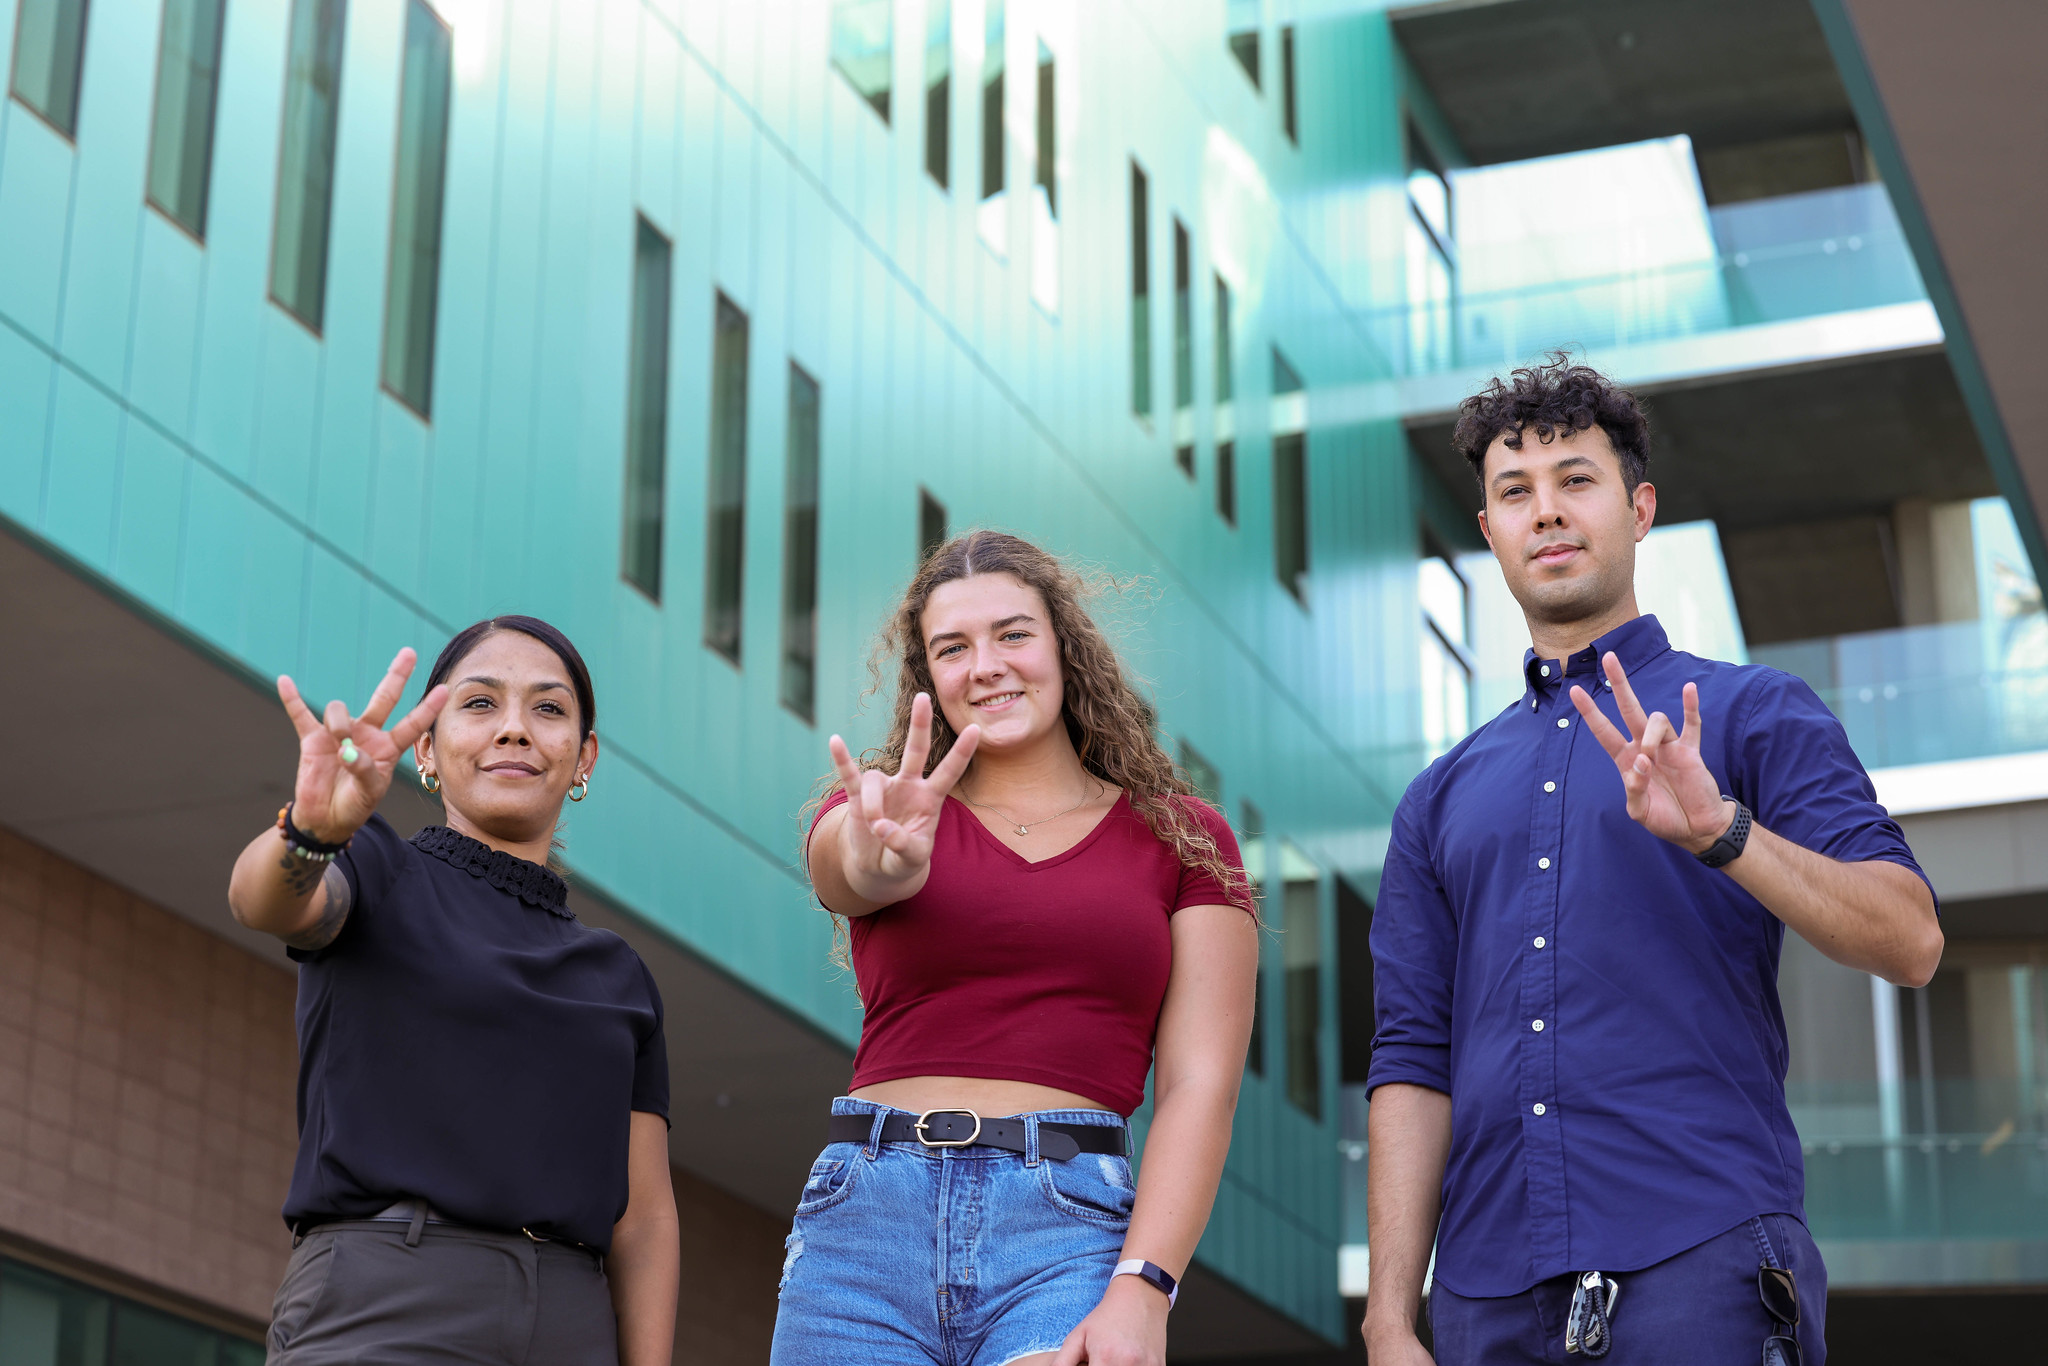 three students outside posing for photo